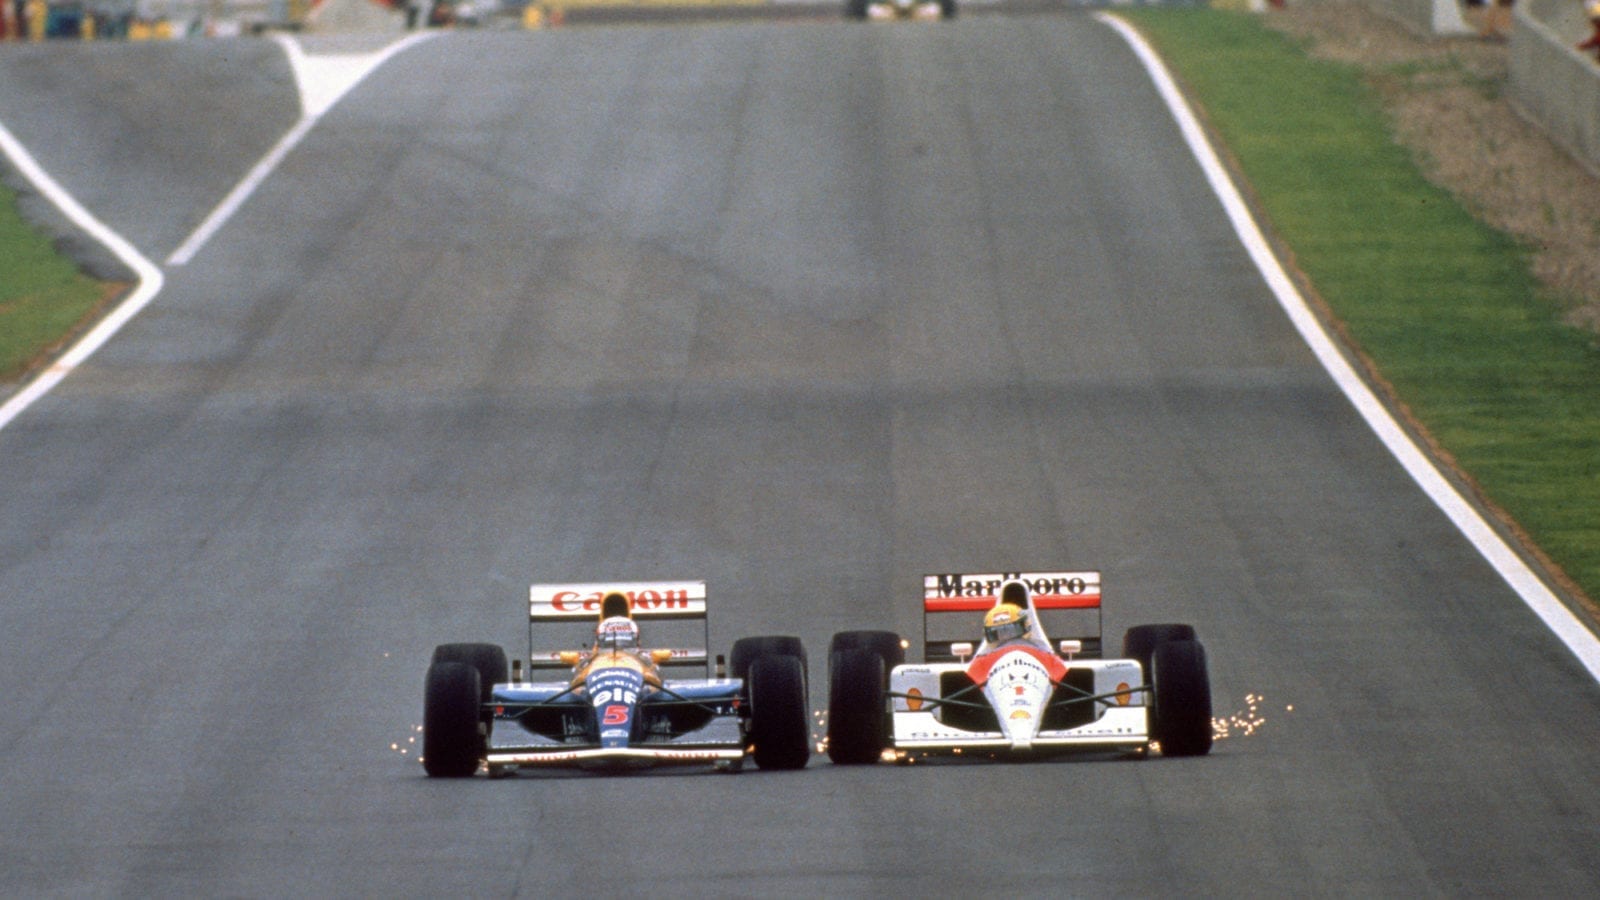 Nigel Mansell and Ayrton Senna are side by side with sparks flying during the 1991 Spanish Grand Prix